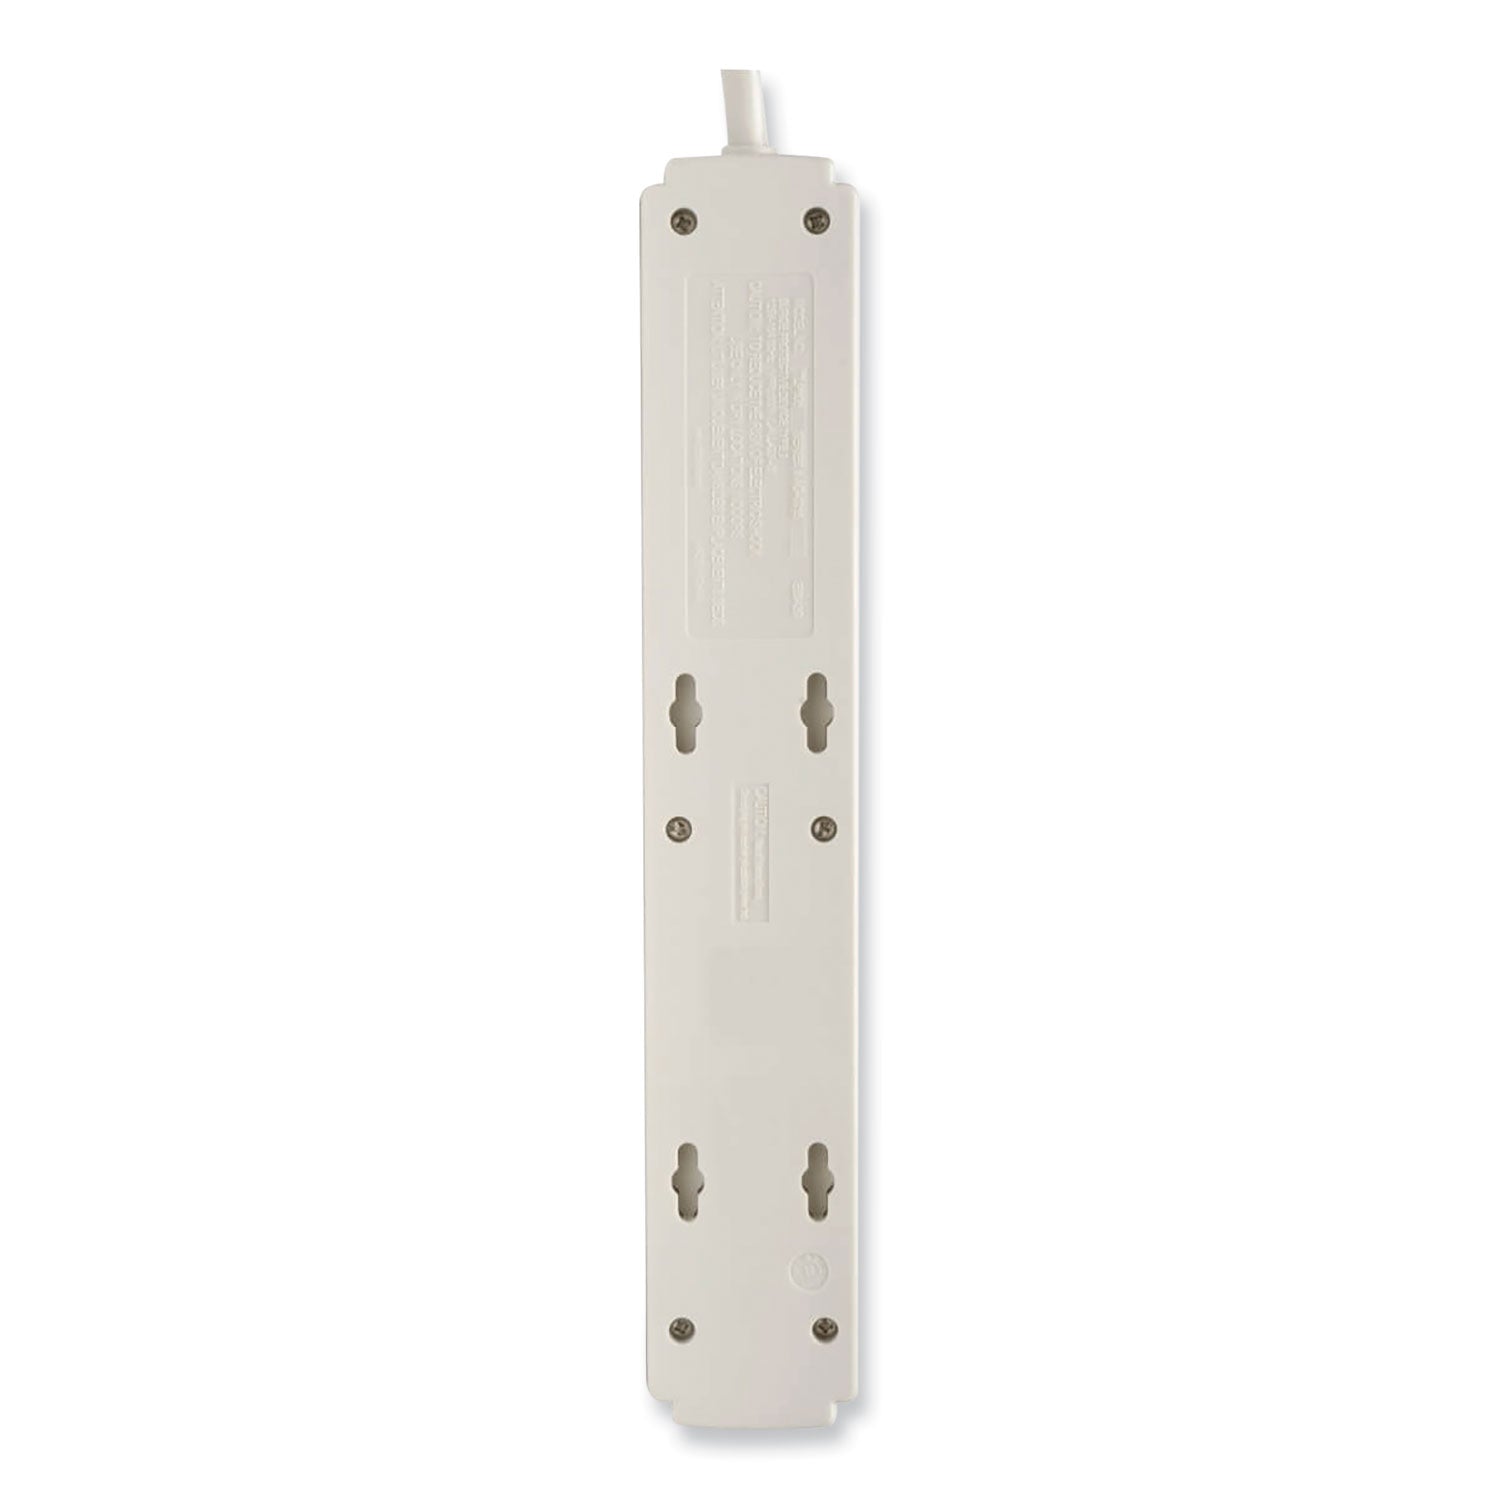 Protect It! Surge Protector, 6 AC Outlets, 6 ft Cord, 790 J, Light Gray - 